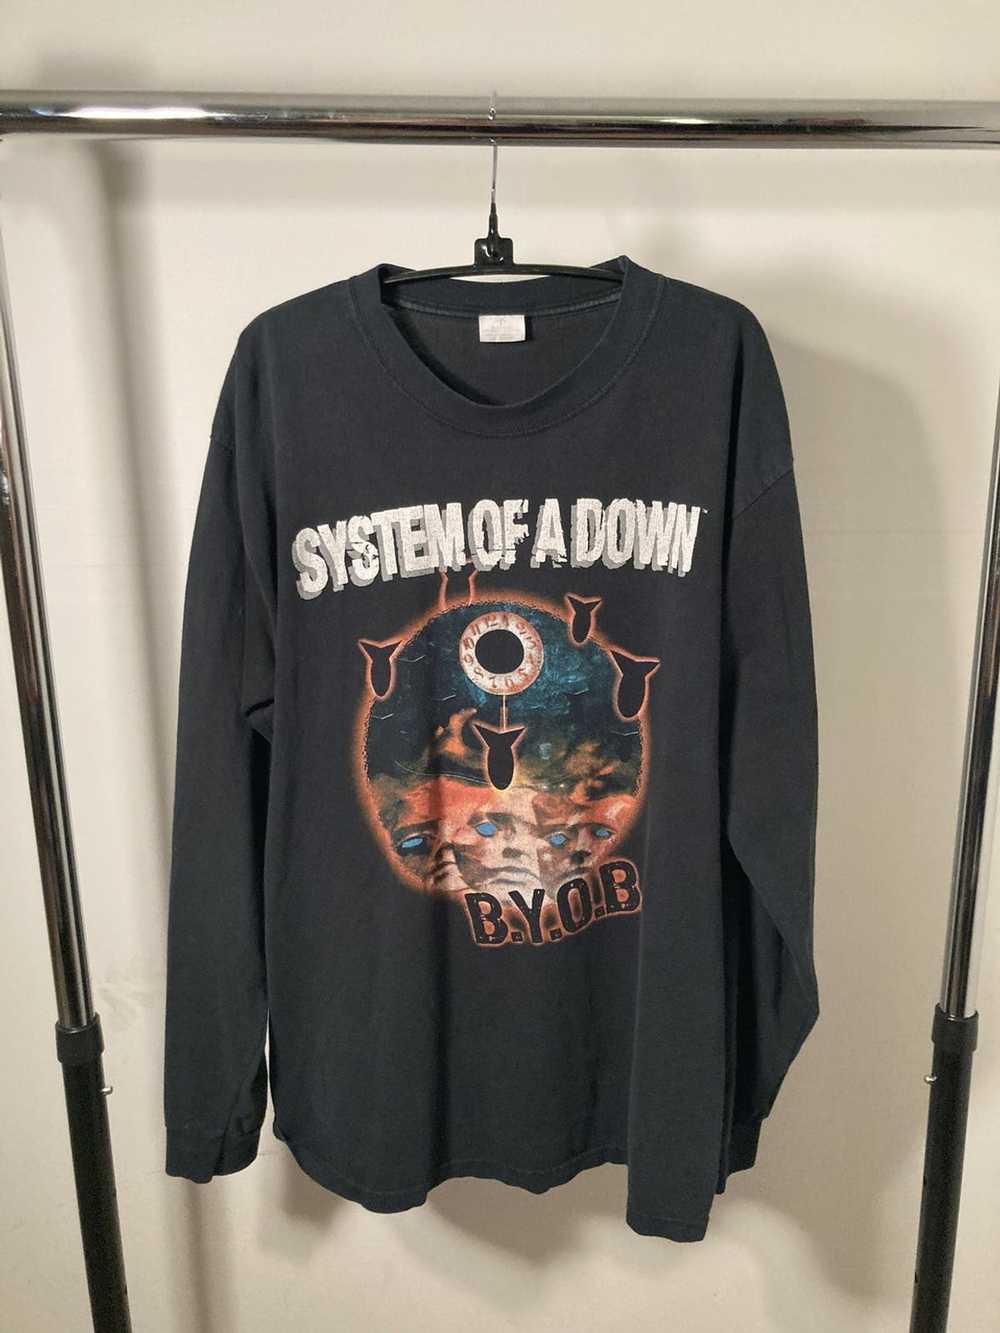 Band Tees System of a Down L/S BYOB Tee - image 1